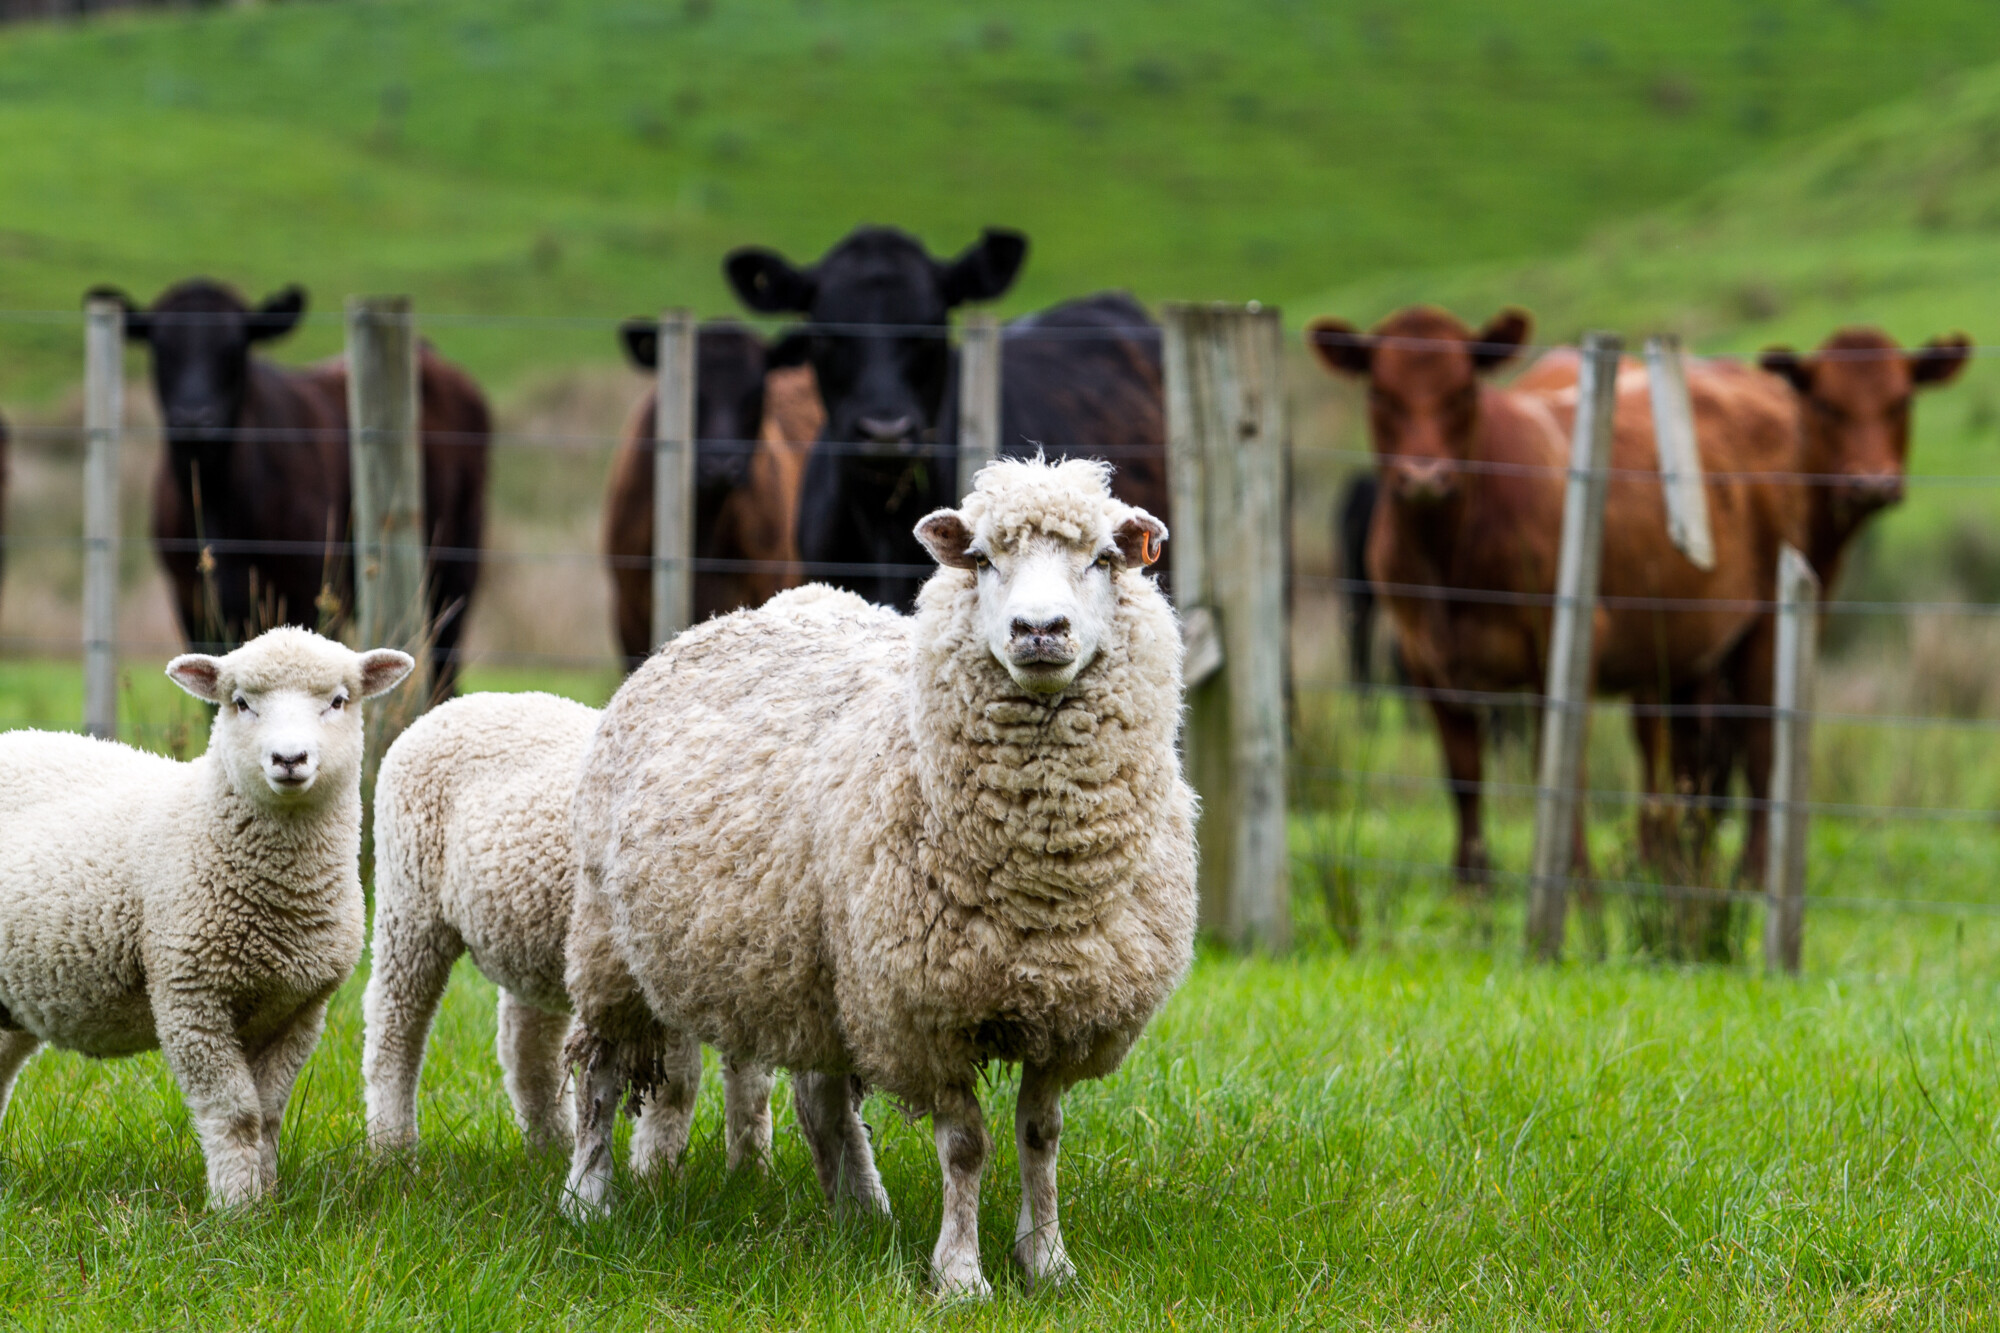  cattle prices rising but a big fall for finished lambs